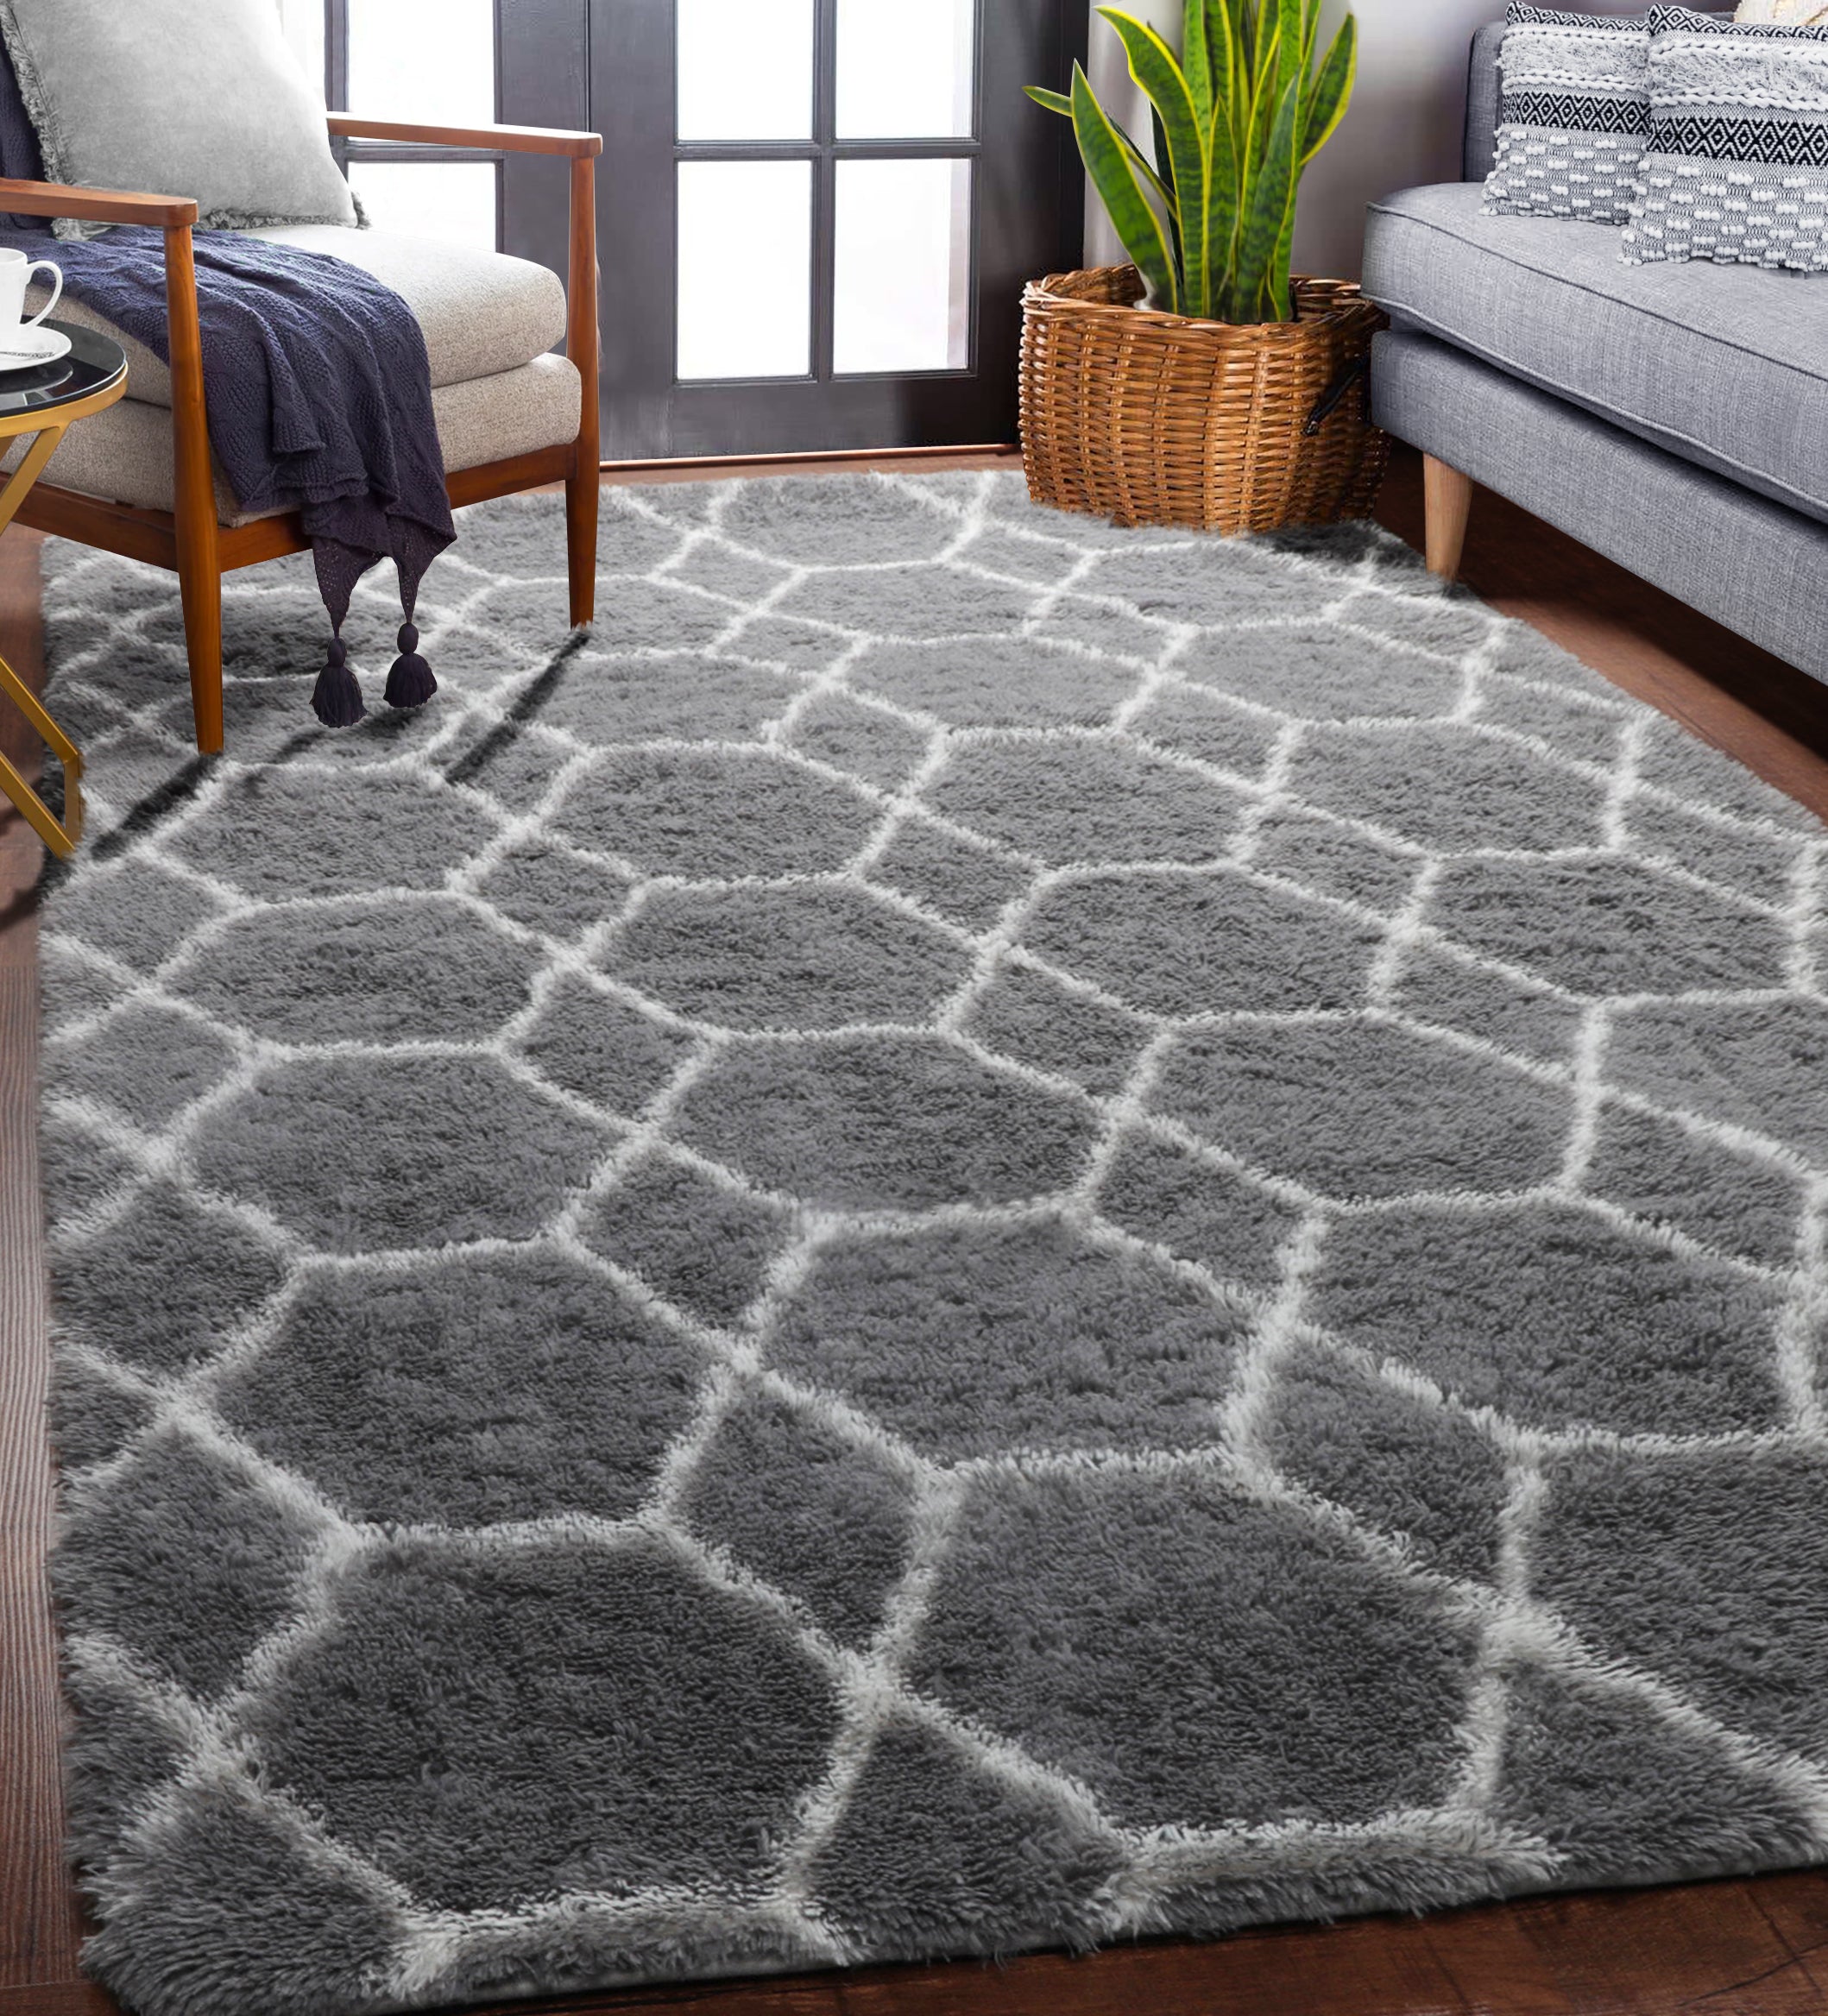 Moroccan Area Rug for Bedroom Living Room, Grey and White Rug